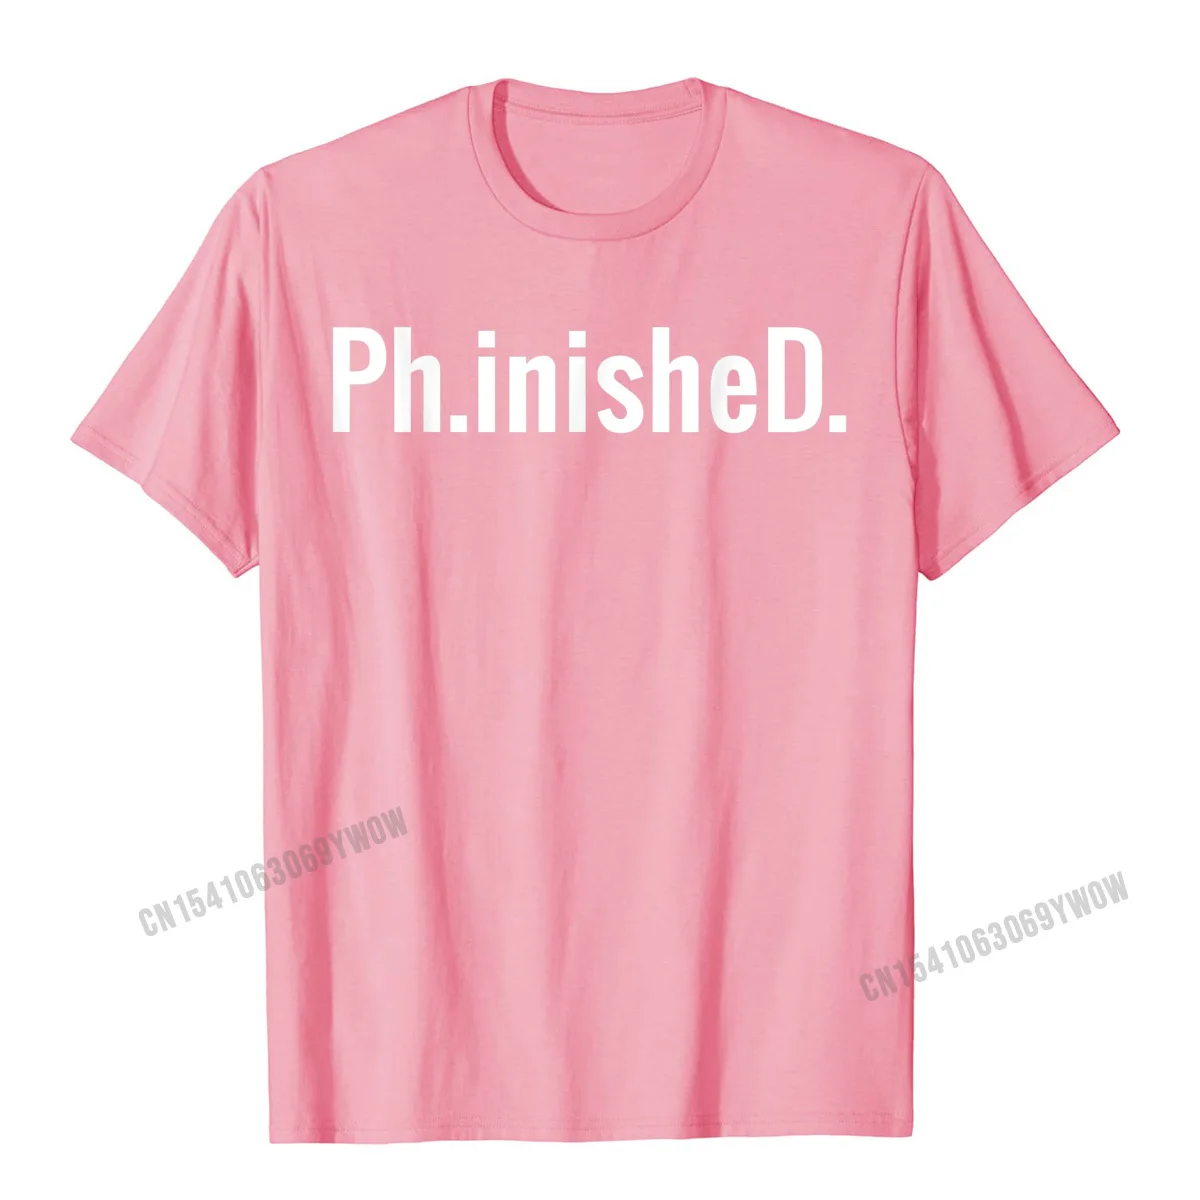 Summer 2021 Fashion Short Sleeve Cool Tshirts 100% Cotton Crewneck Men Tees Design T-Shirt Summer Free Shipping Phinished A Funny PhD T Shirt for a Graduate Ph.inisheD.!__878 pink